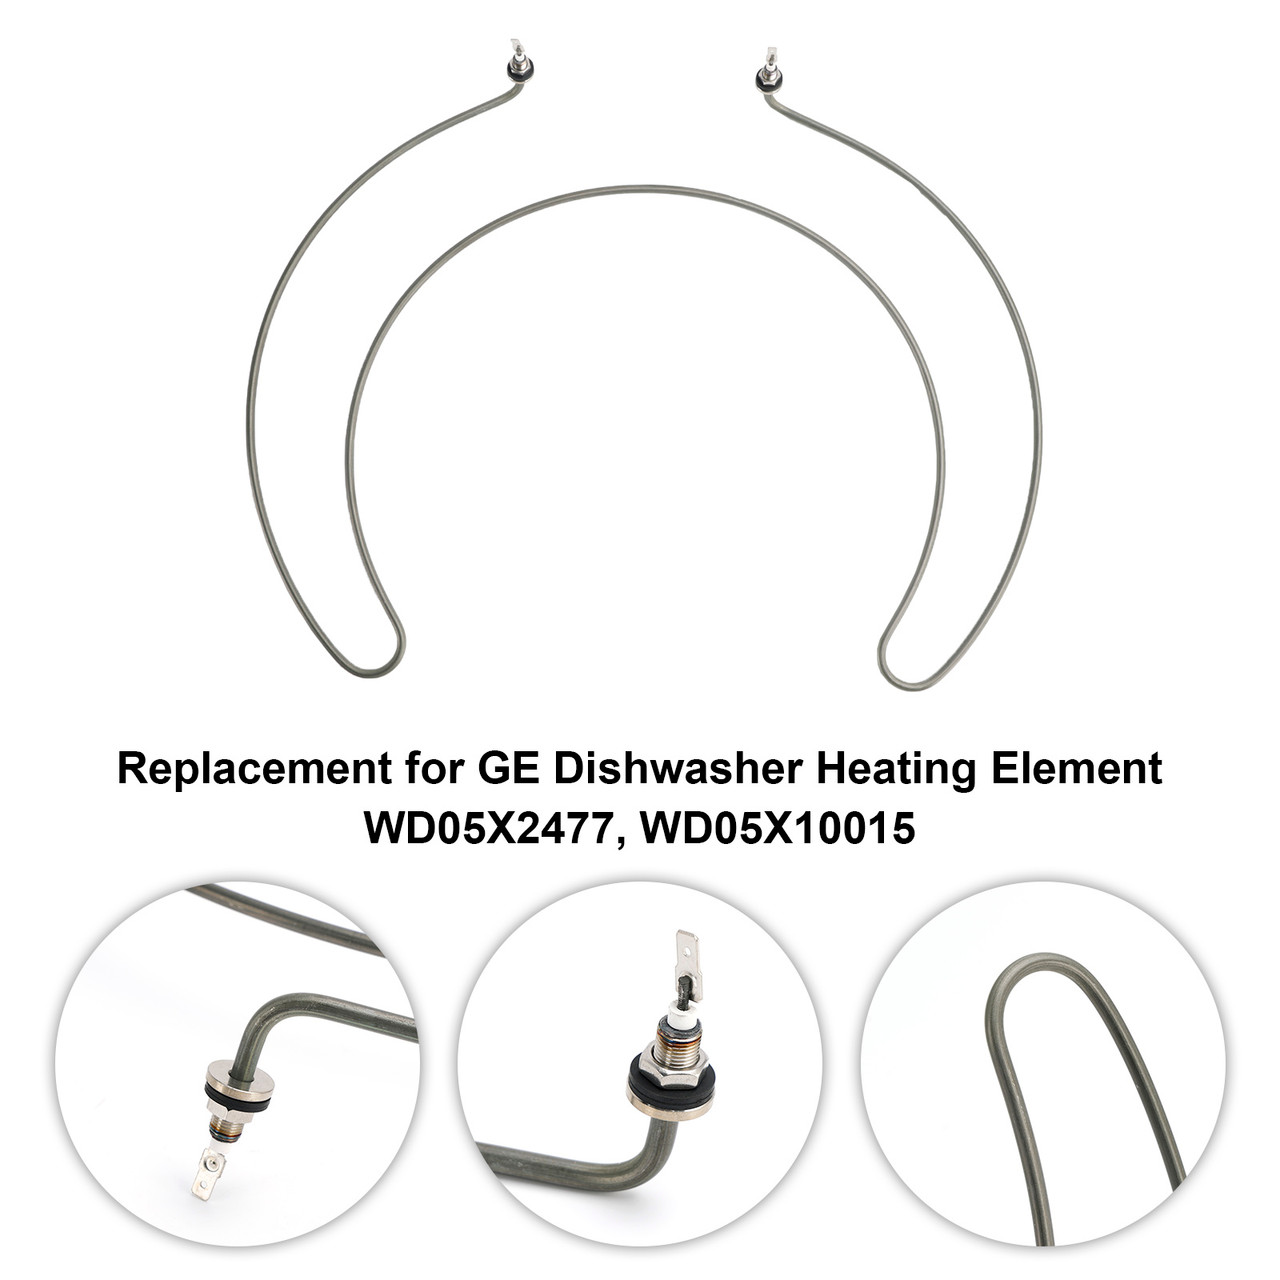 Replacement for GE Dishwasher Heating Element WD05X2477, WD05X10015